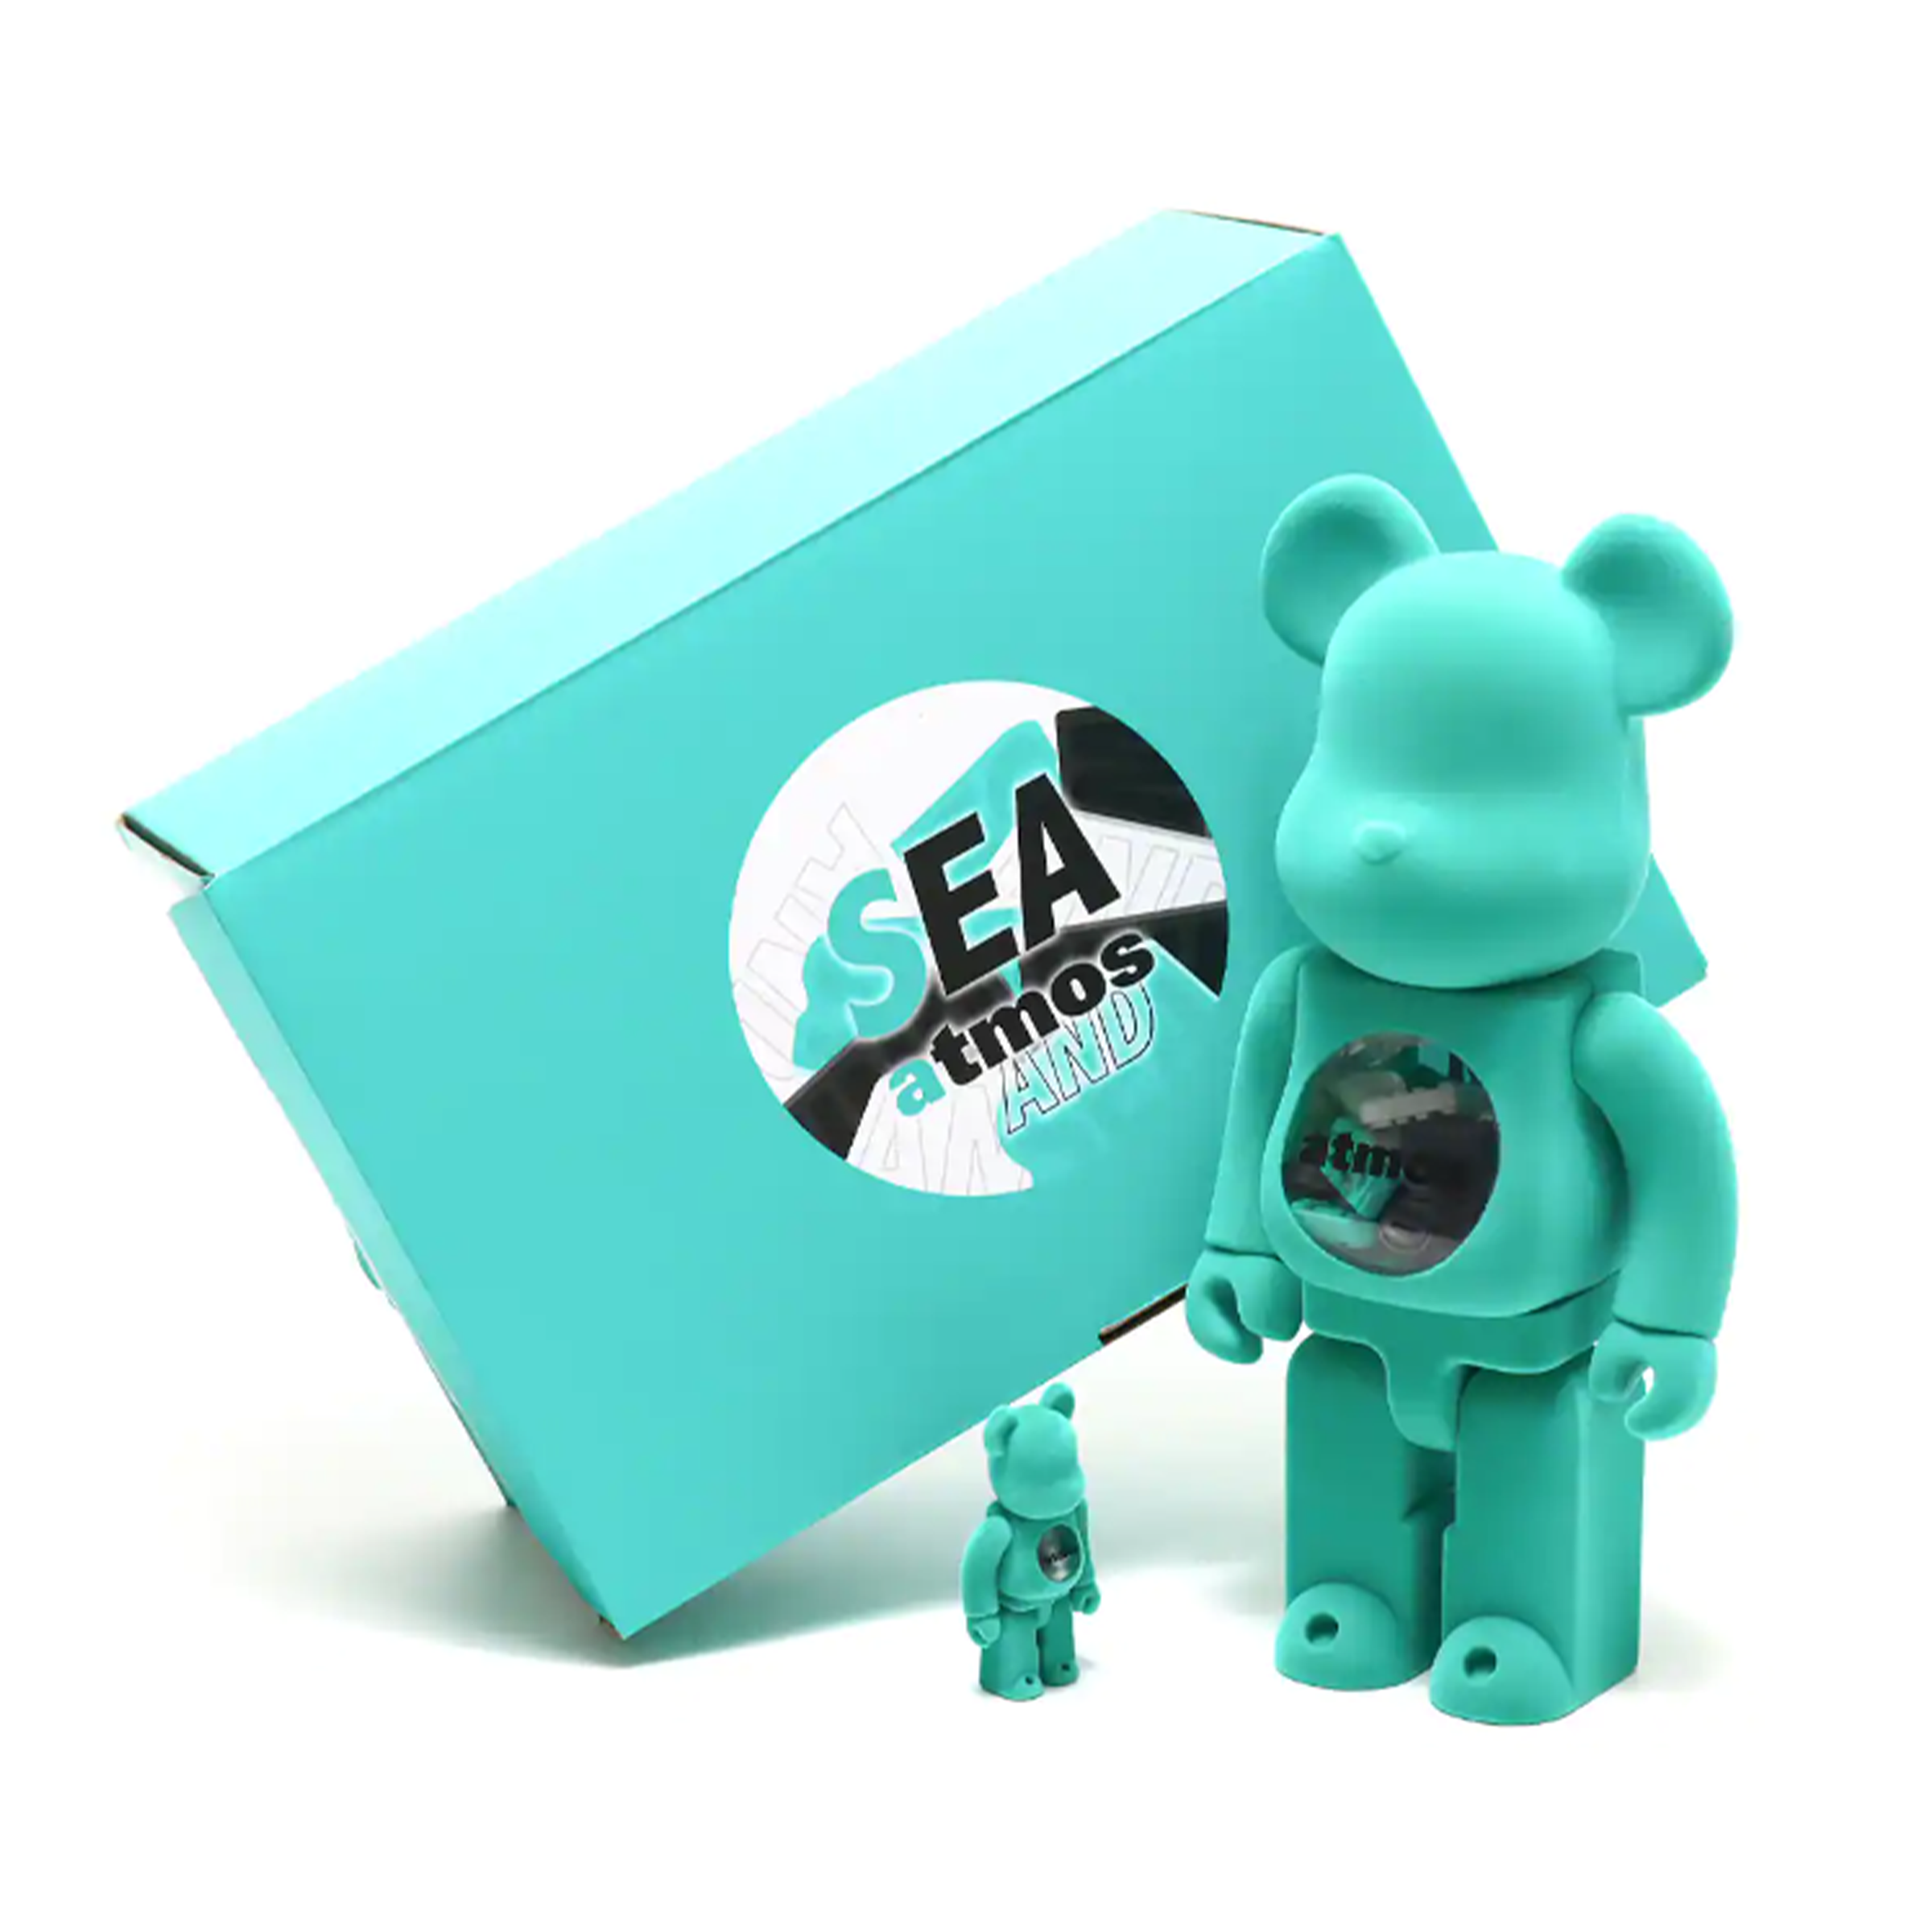 BE@RBRICK atmos AGED MAP 100％ & 400％